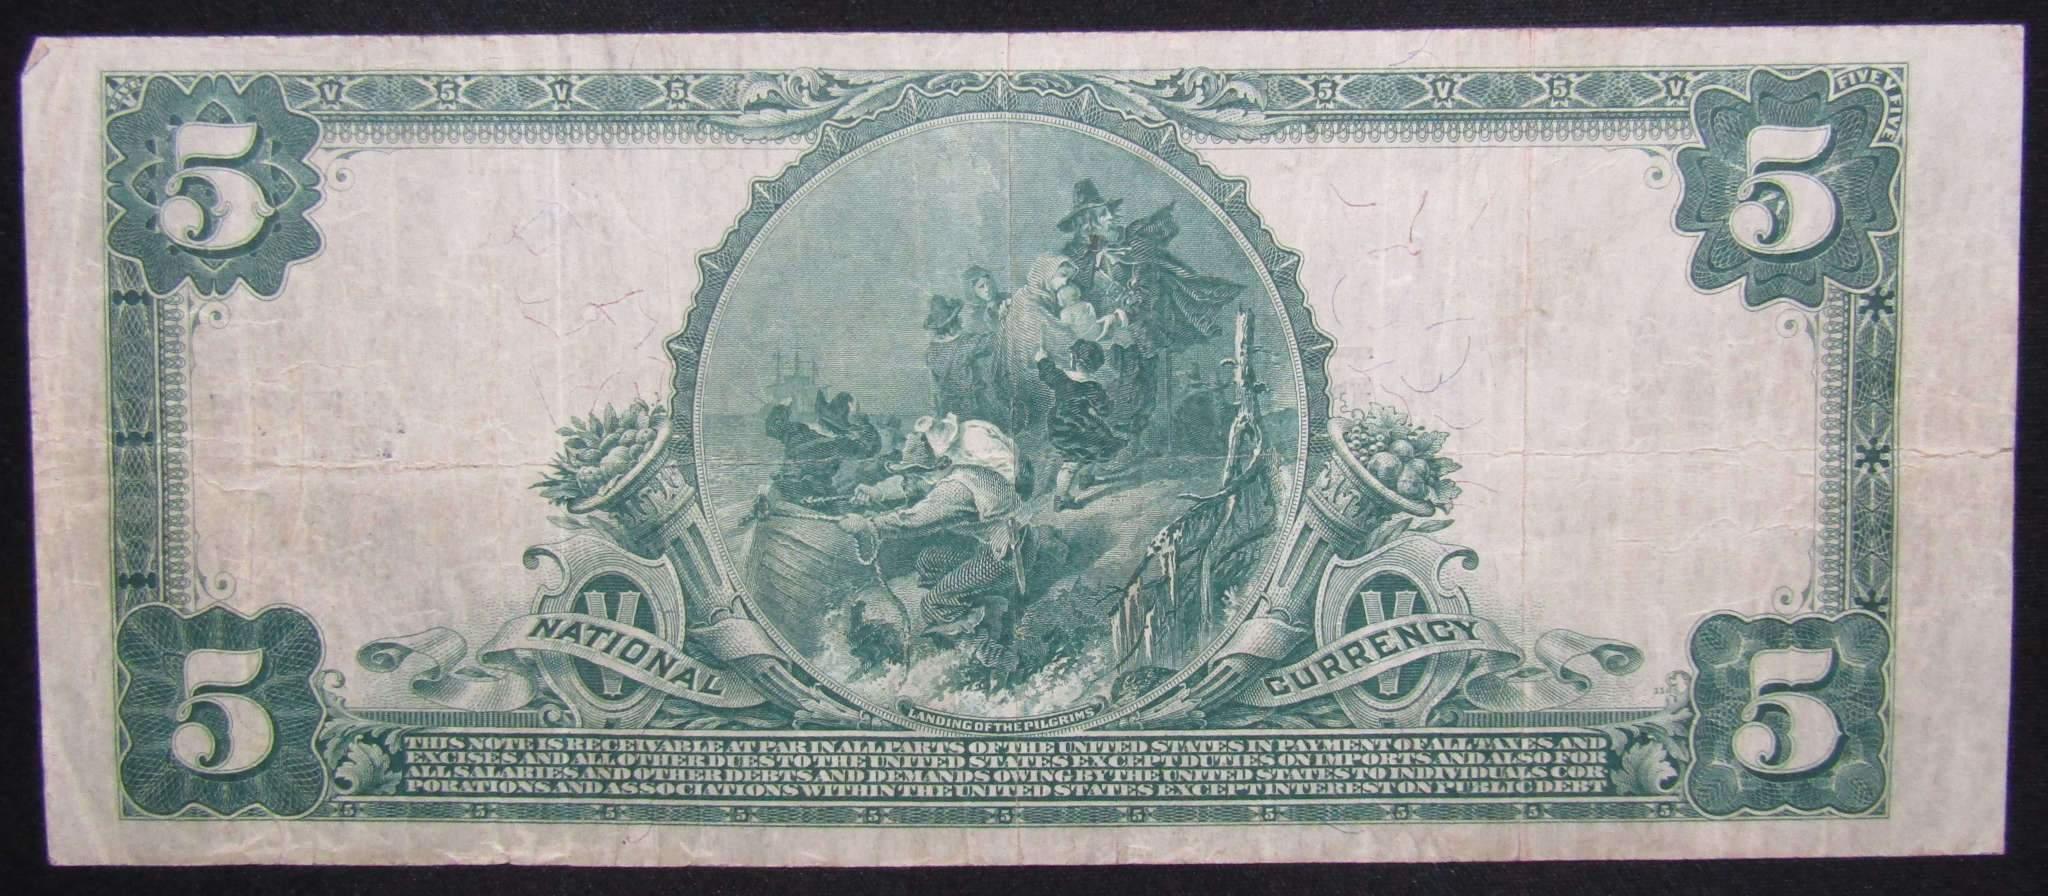 1902 $5 National Bank Note Sommerville MA Charter #4771 Fine / Very Fine